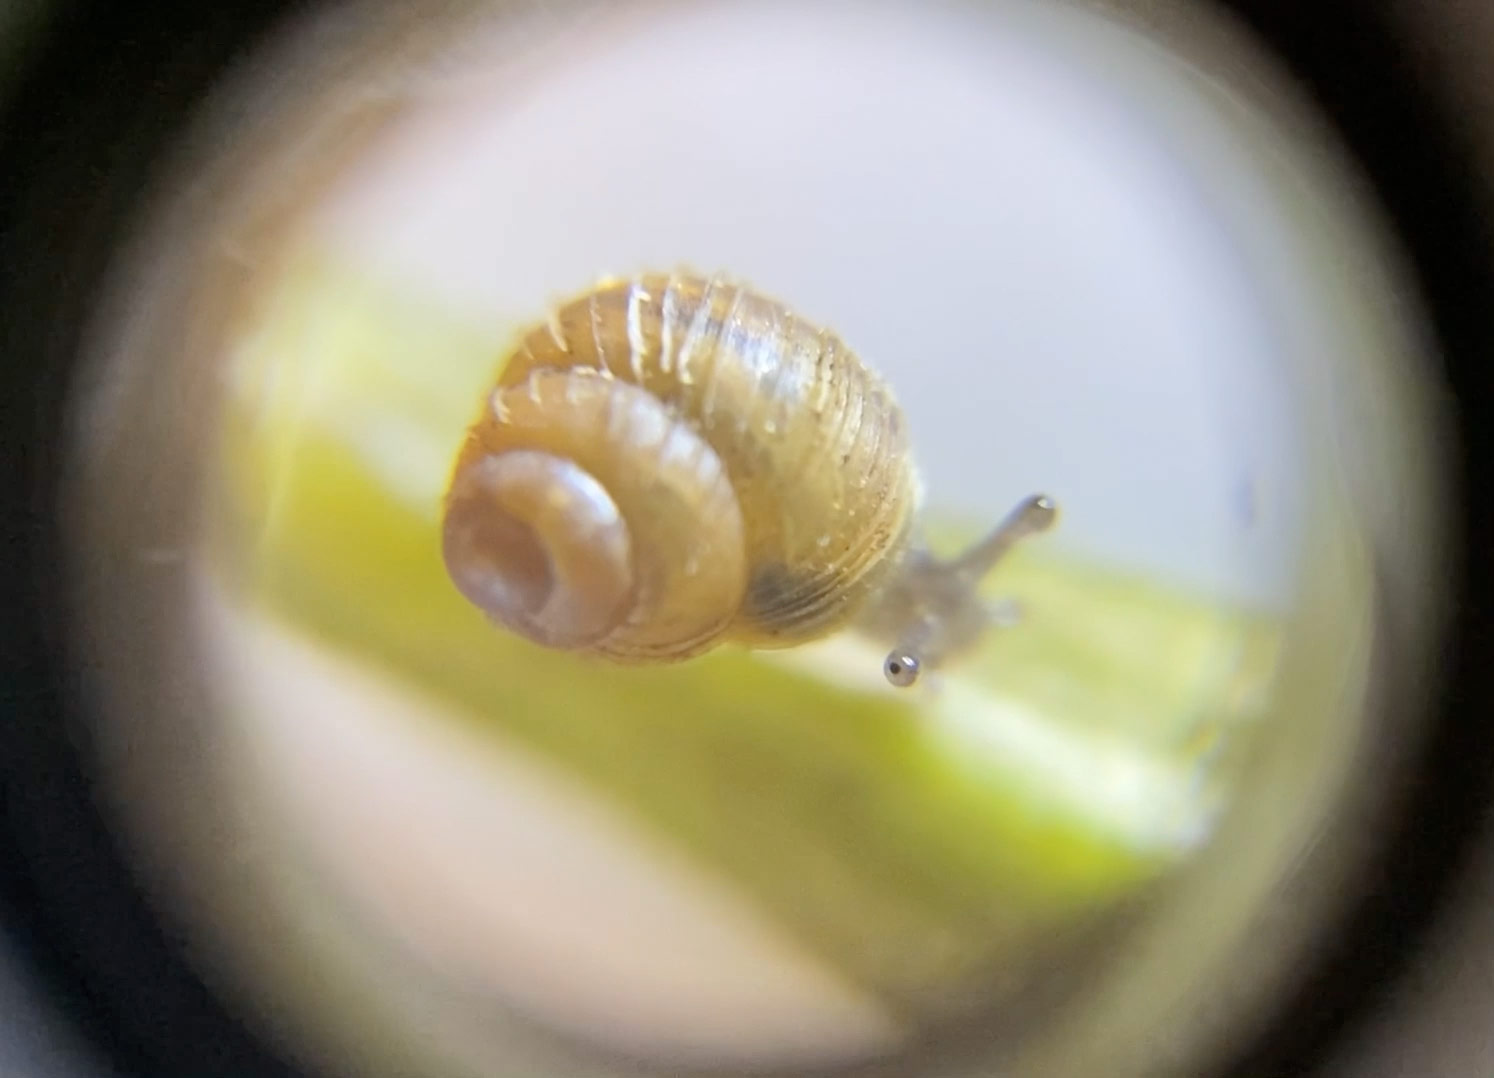 Newly discovered boreal top snail